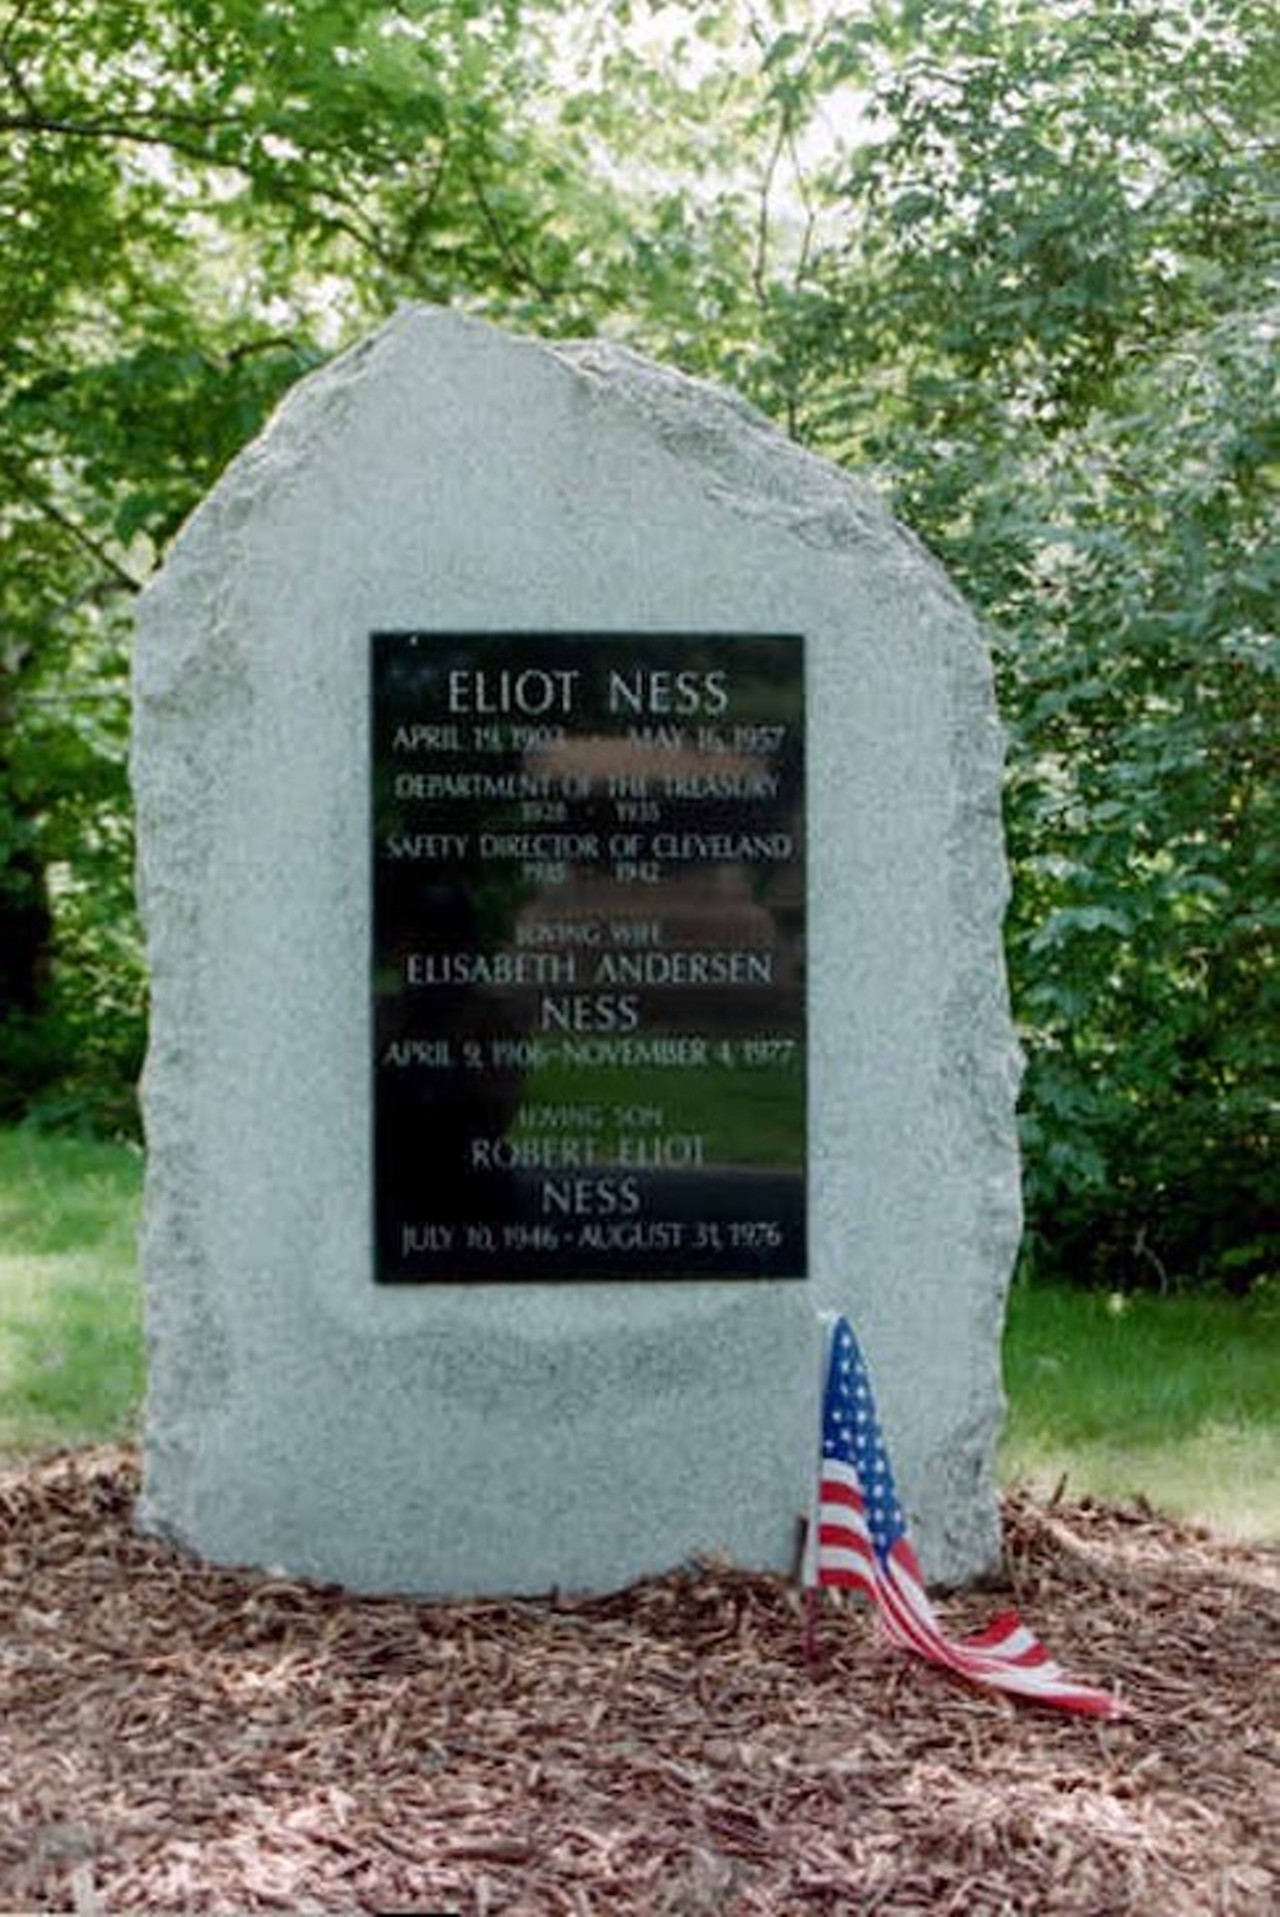 Eliot Ness
Lakeview Cemetery
Ness was the Public Safety Director for Cleveland from 1935-1942, but he&#146;s better known for helping to catch Al Capone in Chicago. 
Photo via Michelle Belanger/Wikimedia Commons